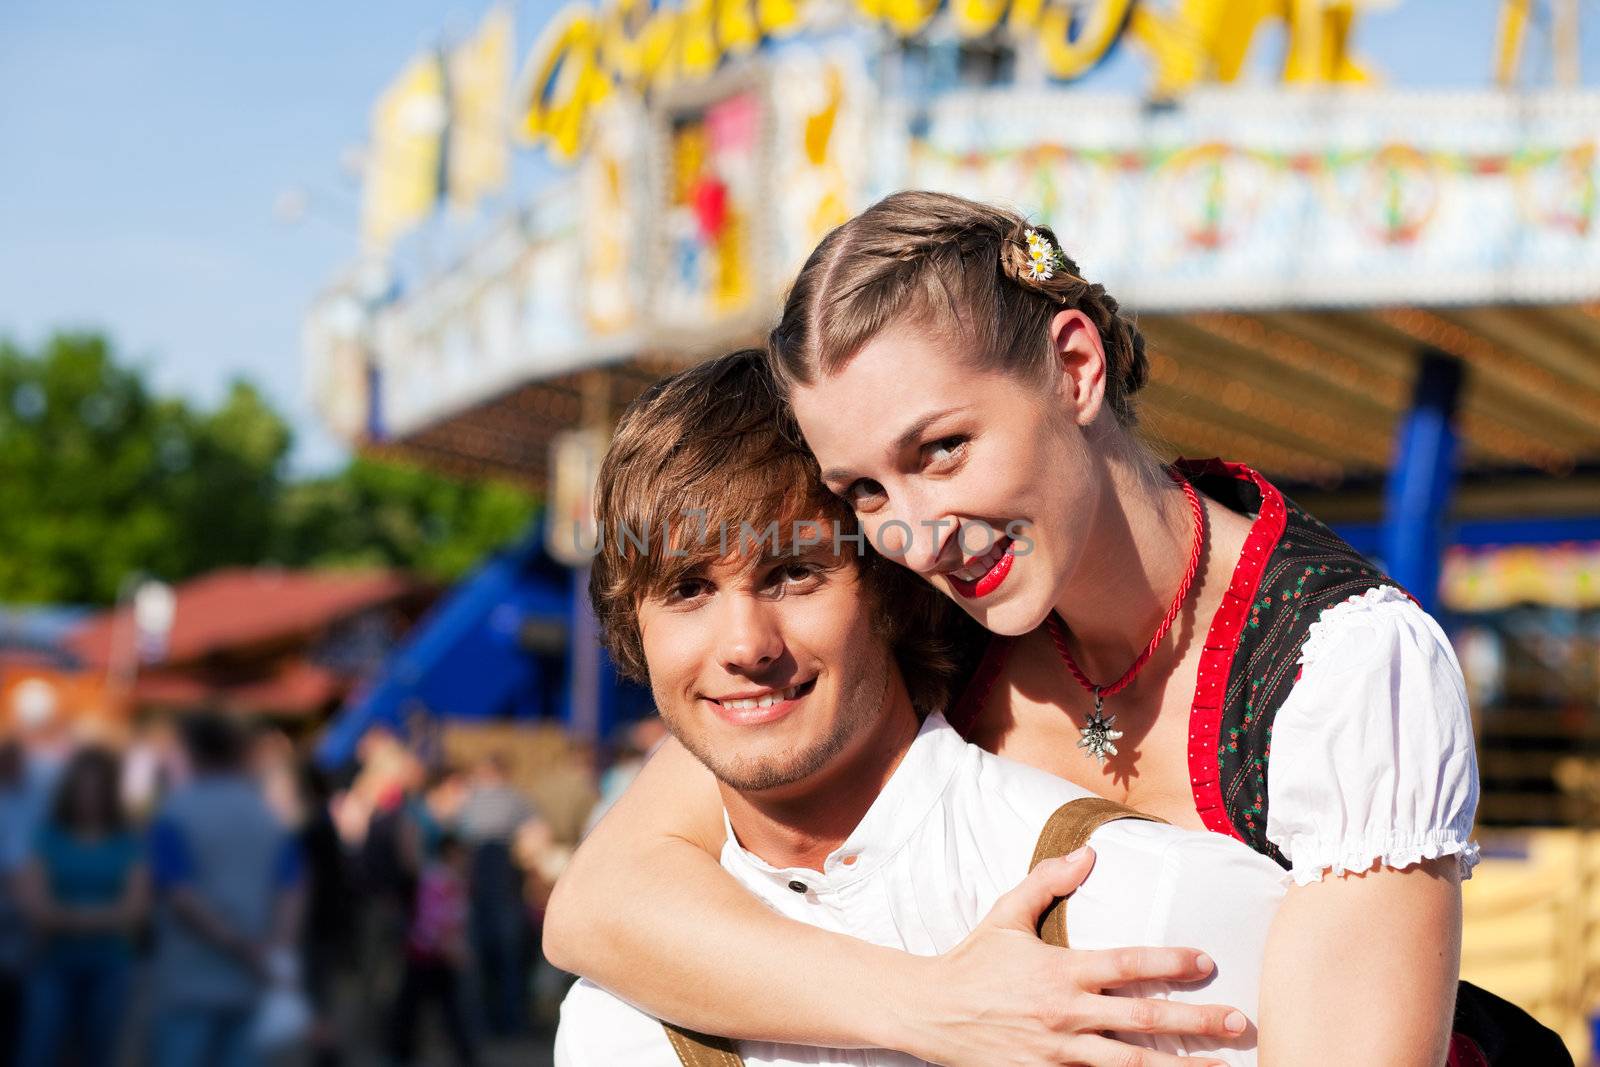 Young and beautiful couple in traditional Bavarian Tracht - Dirndl and Lederhosen - embracing each other on a fair like a Dult or the Oktoberfest; both are standing in front of a big wheel